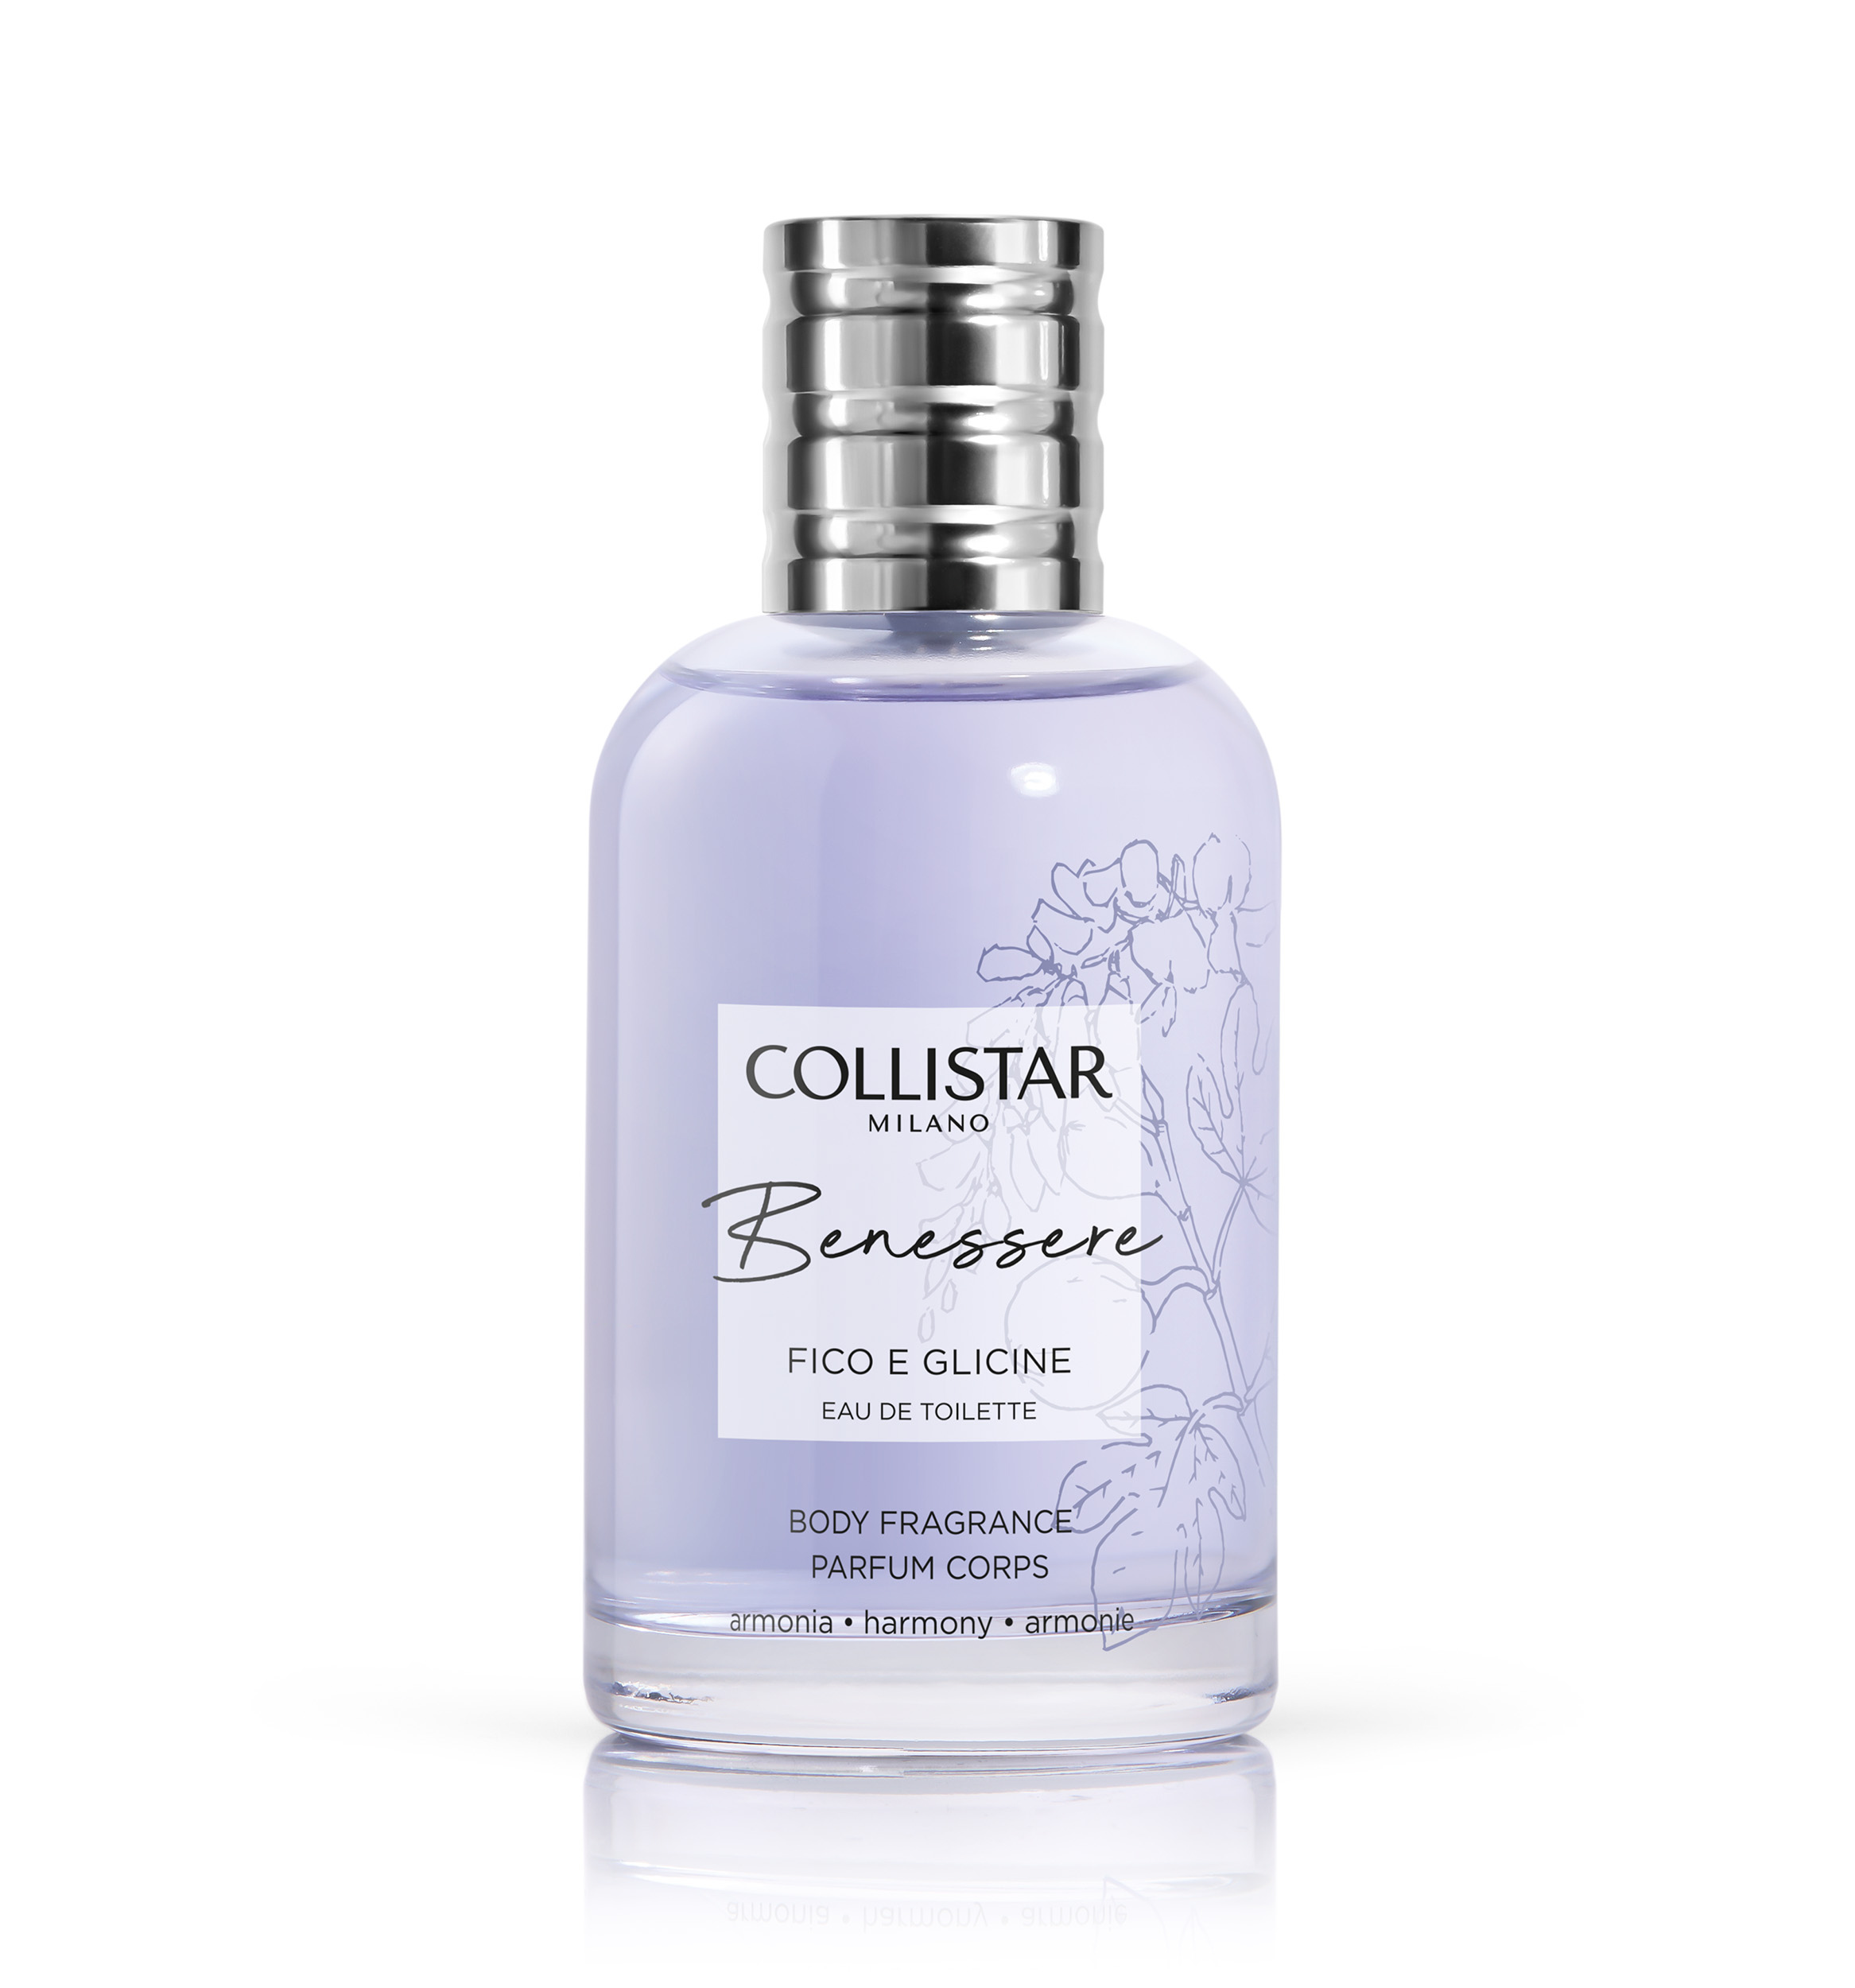 BENESSERE FIG AND WISTERIA BODY FRAGRANCE | Collistar - Shop Online Ufficiale